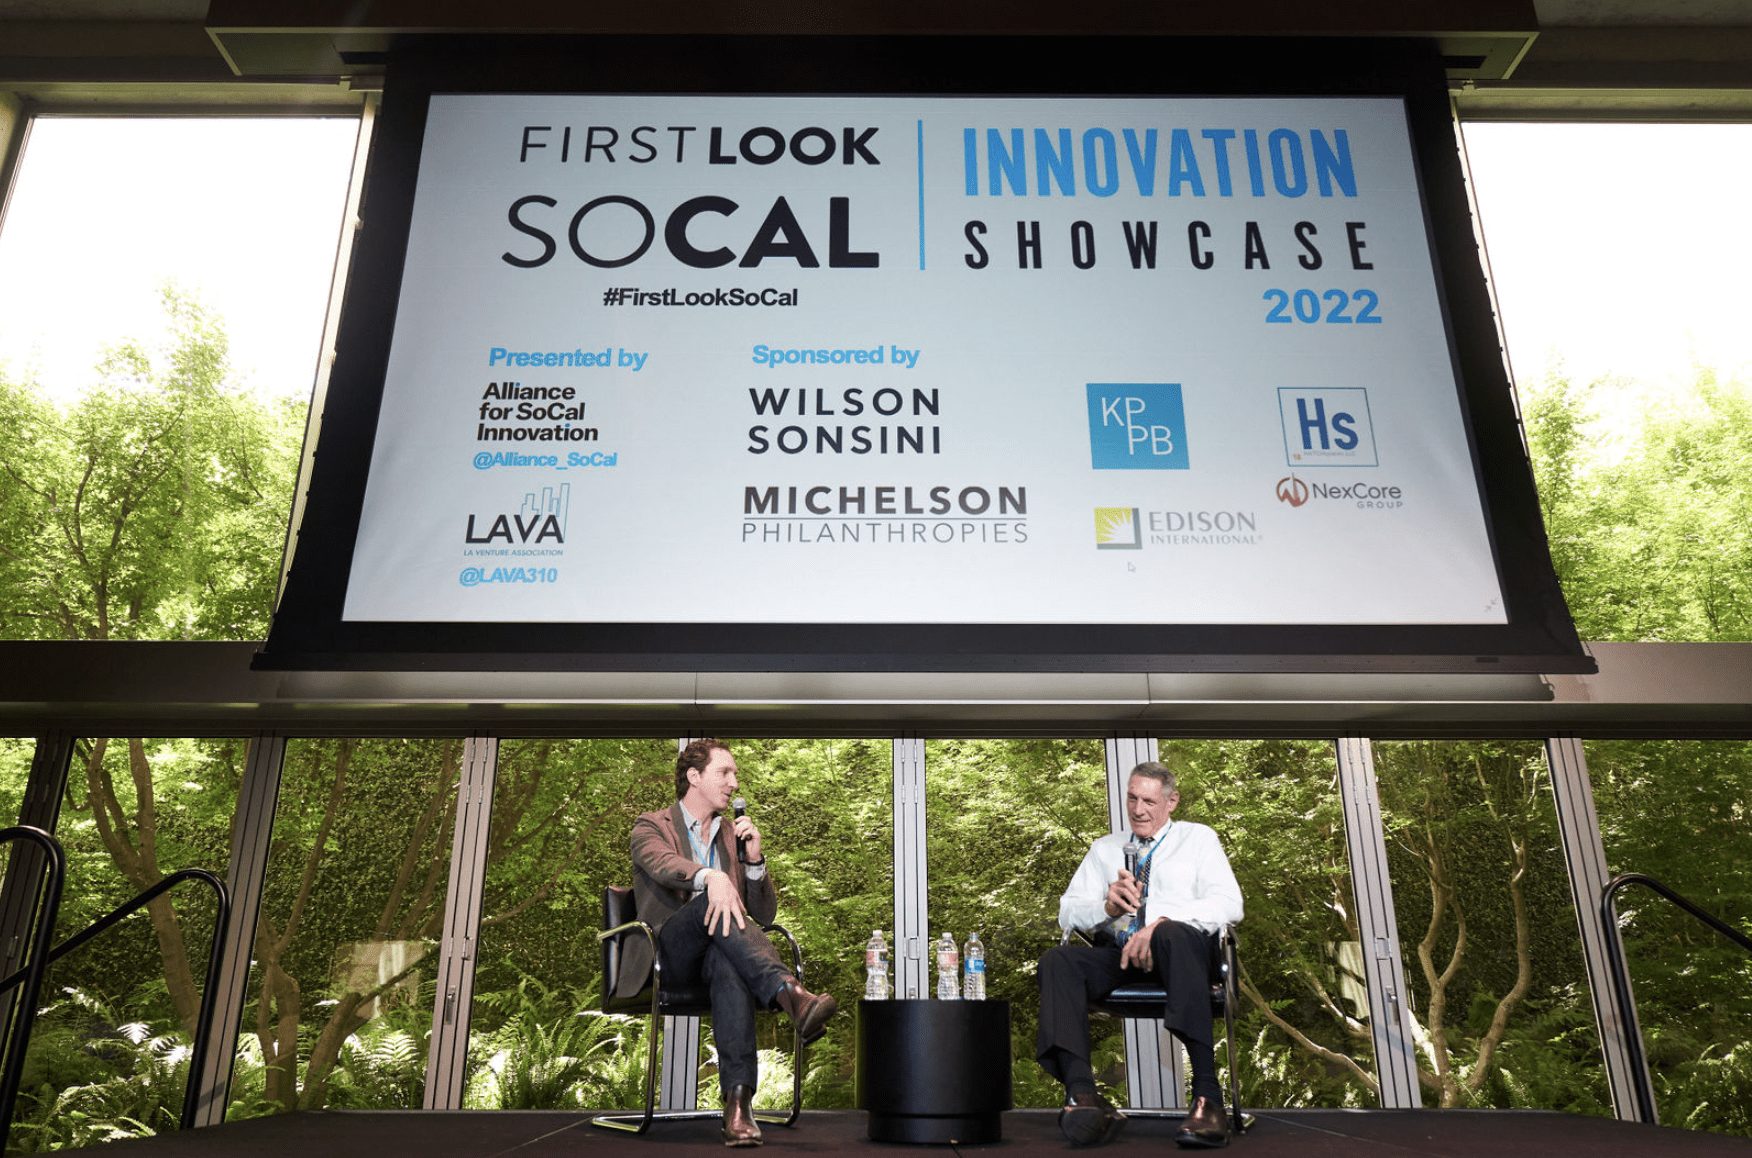 Dr. Gary Michelson at the 2022 First Look SoCal Innovation Showcase